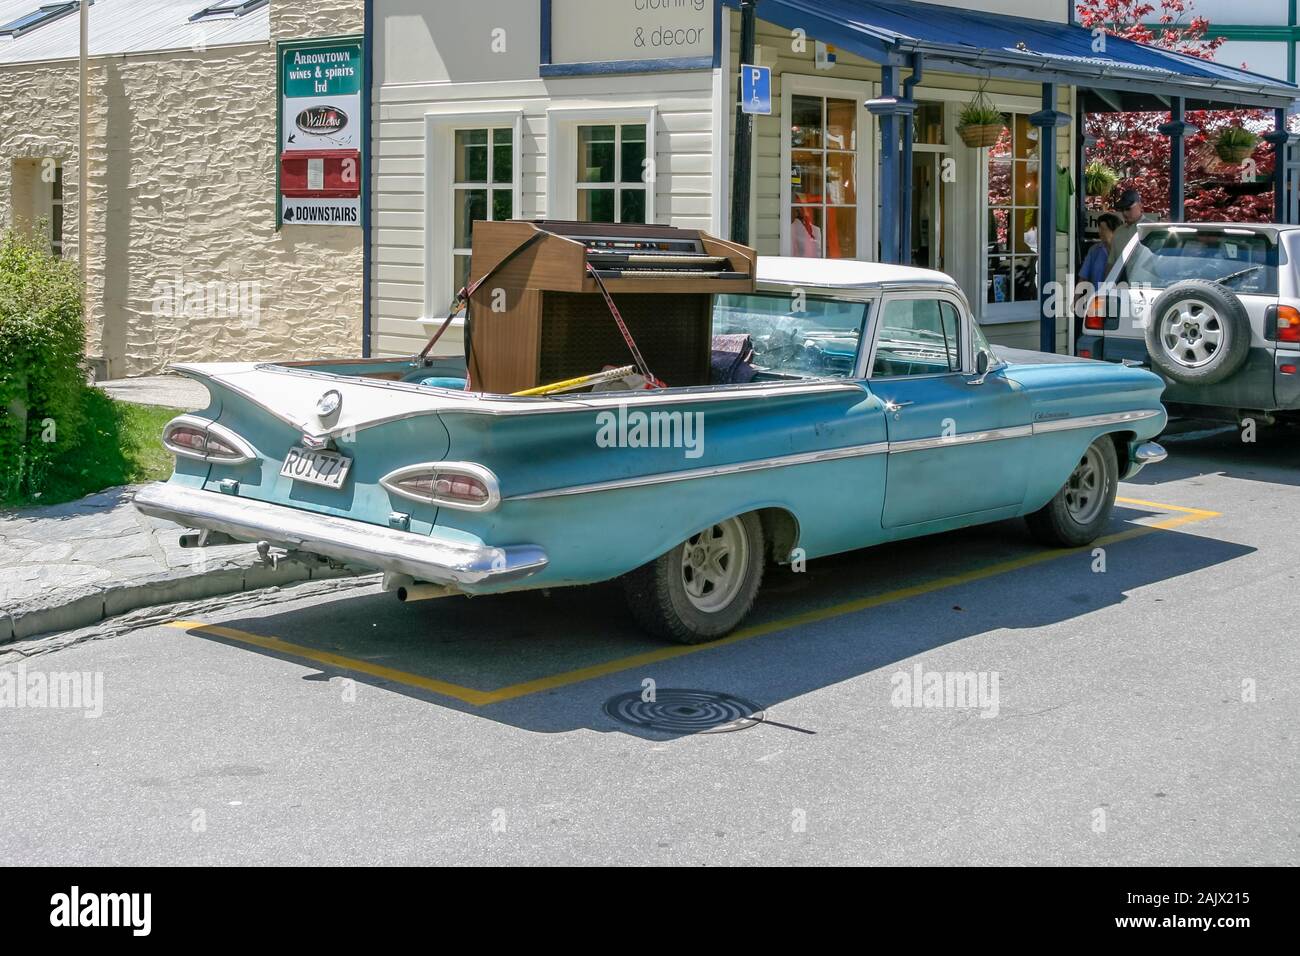 1959 Chevrolet El Camino pickup truck, parked in front of Old Gold Rush era buildings Buckingham Street, Arrowtown, Otago, South Island, New Zealand Stock Photo